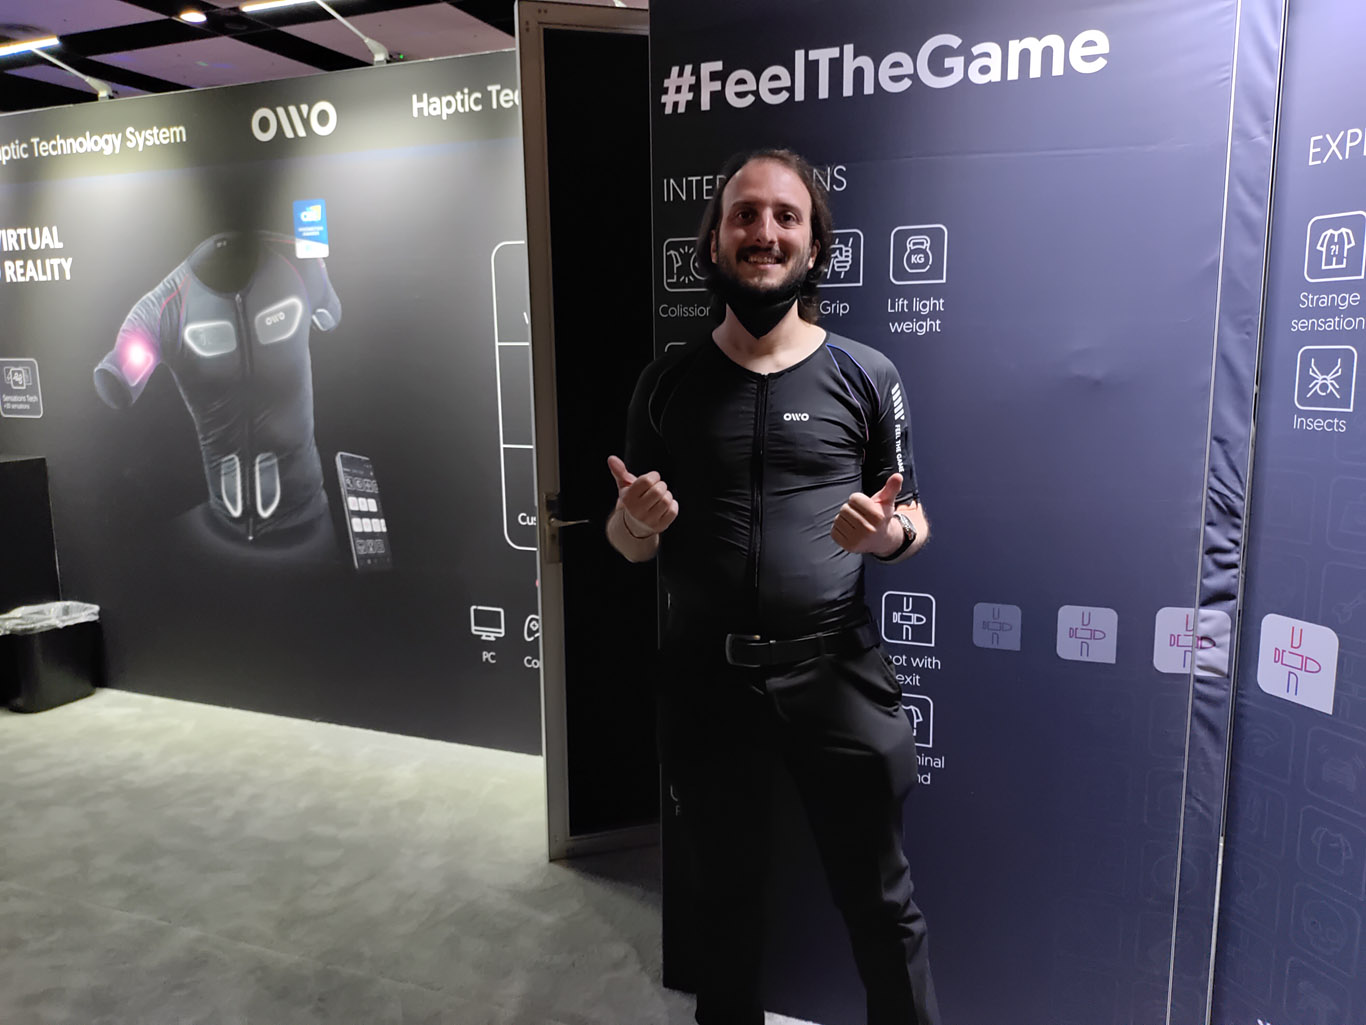 AWE 2022: OWO Vest electrified me in VR